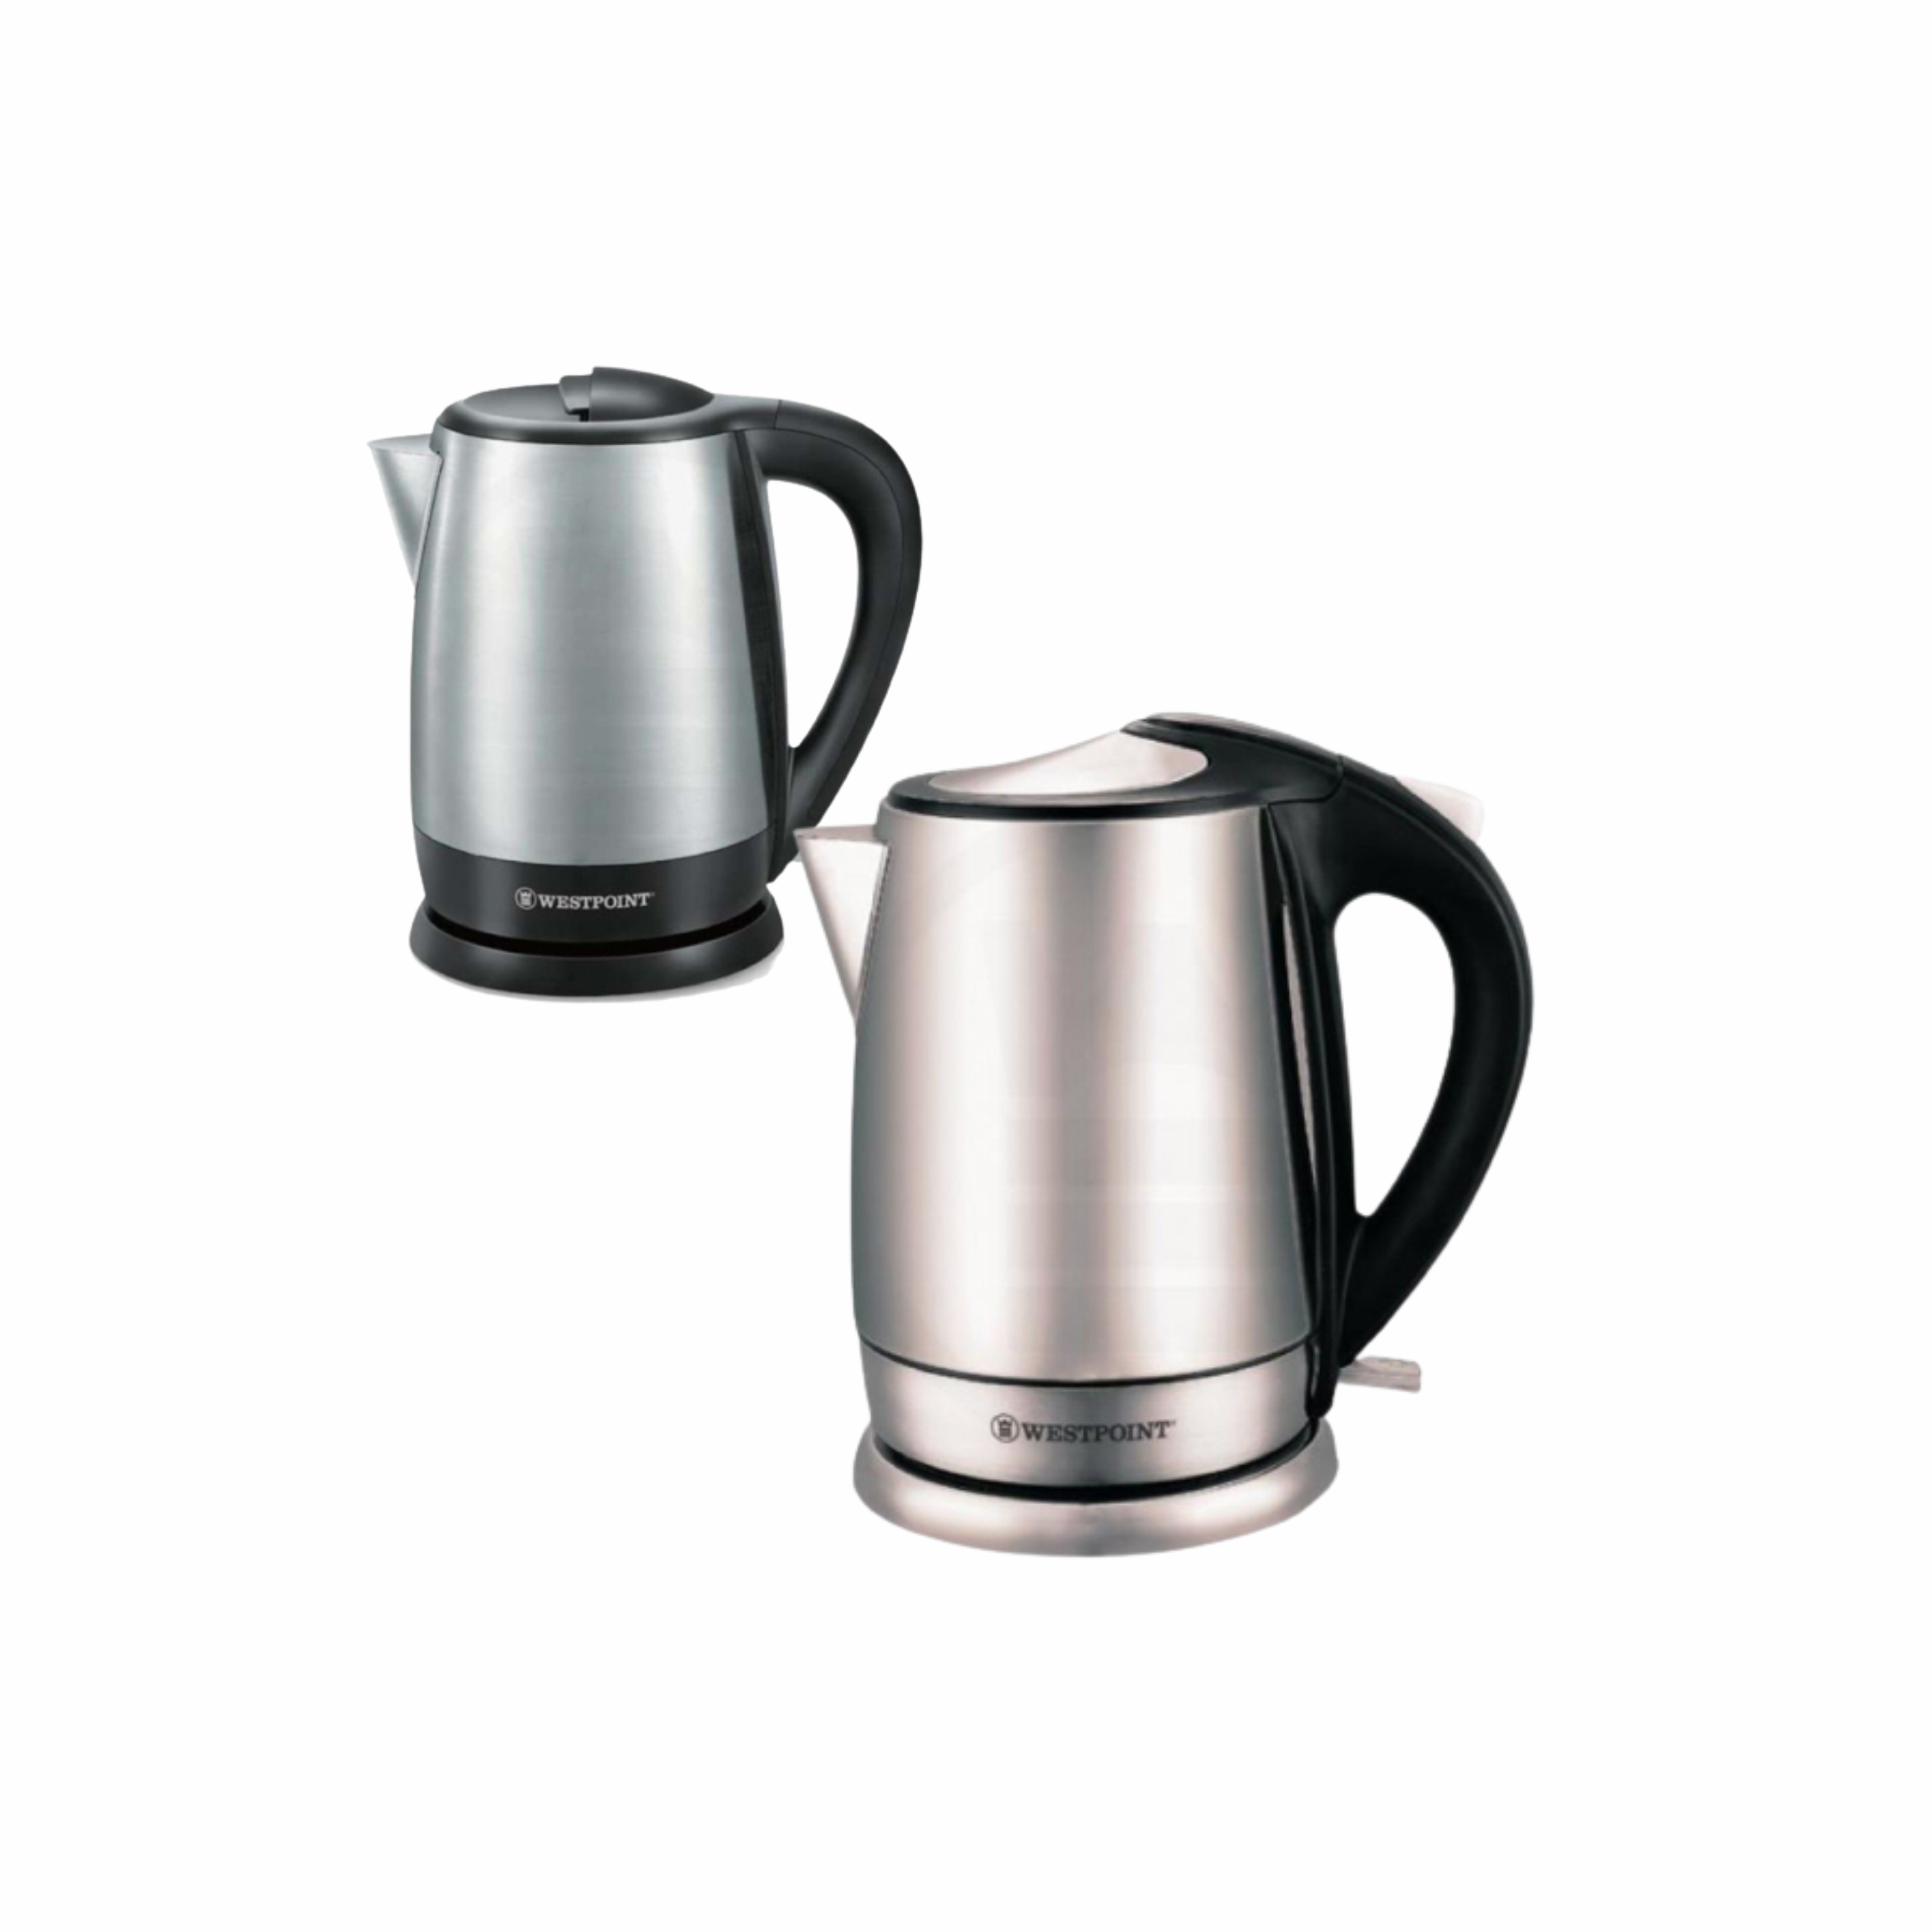 6172/6173 - Cordless Electric Kettle